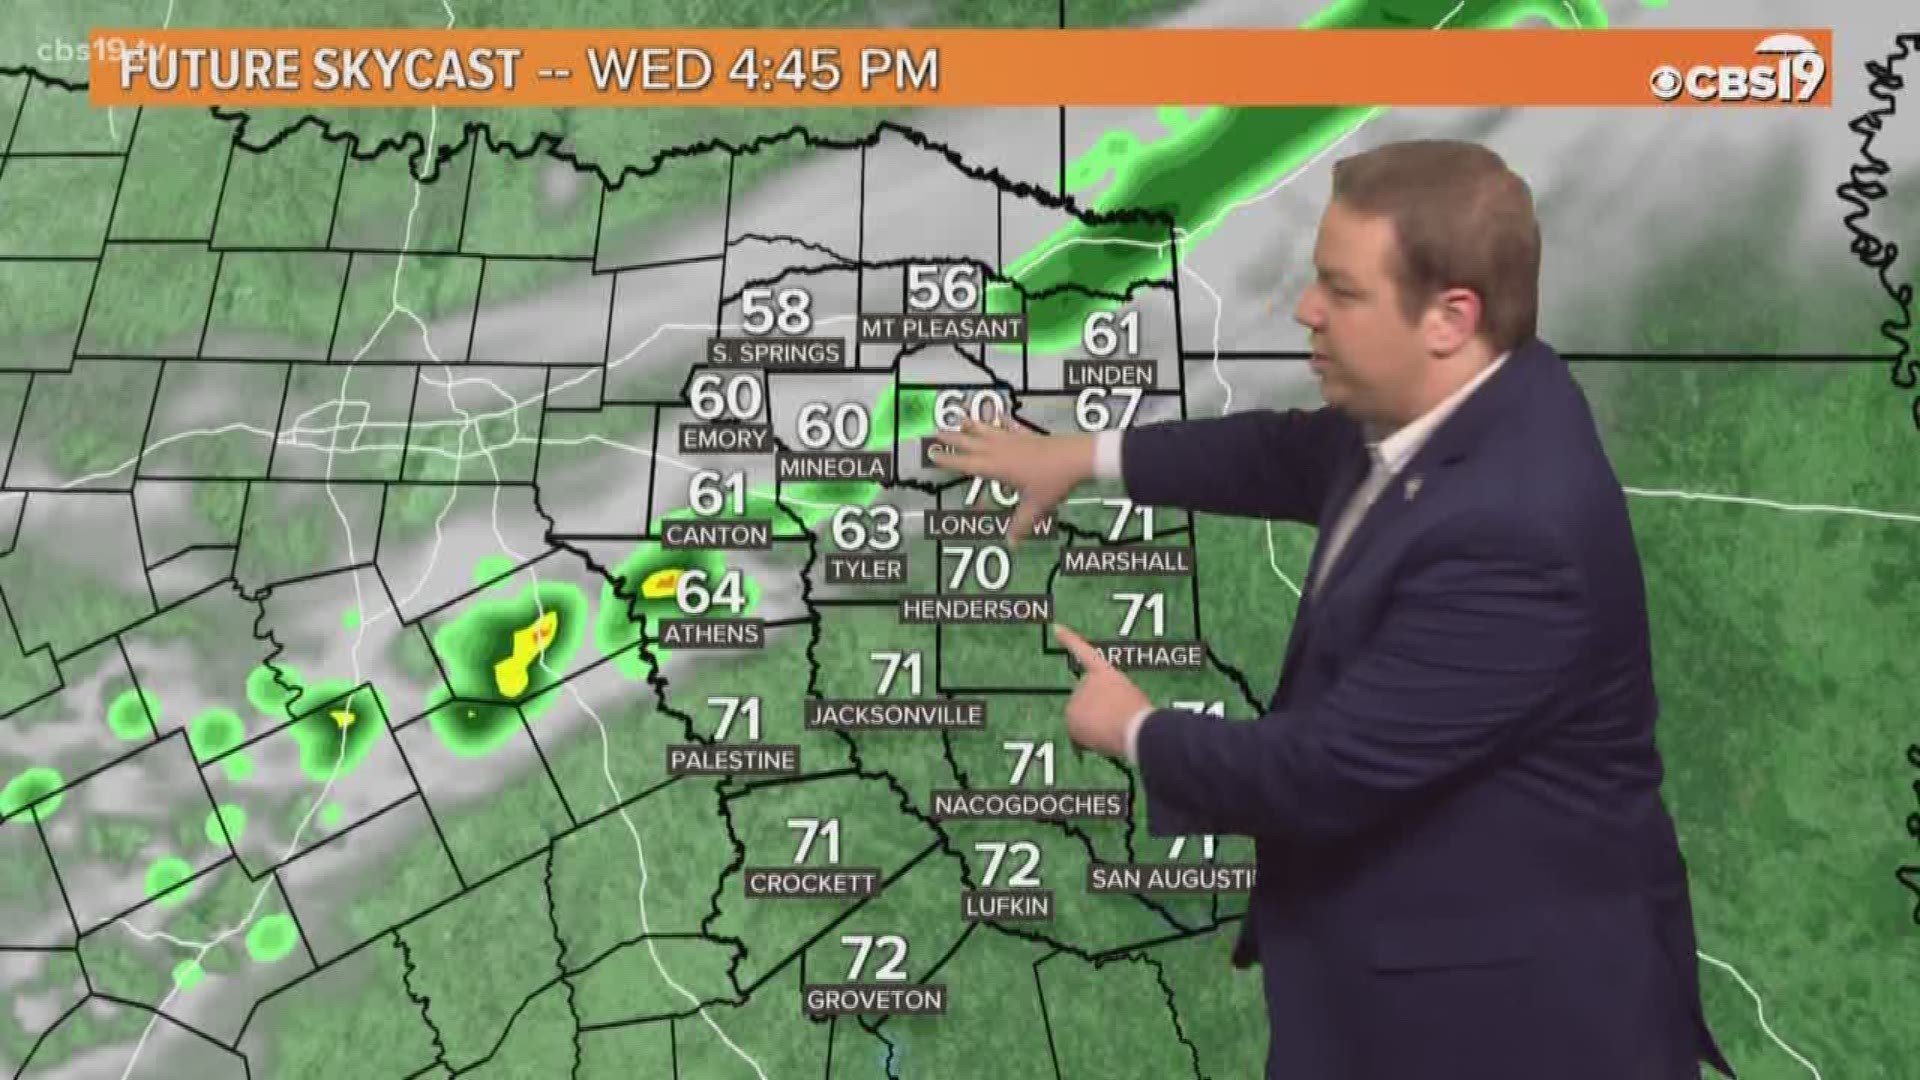 Another great weather afternoon shaping up for East Texas, but Meteorologist Michael Behrens says rain is on the way. Watch his full forecast for the details on when!